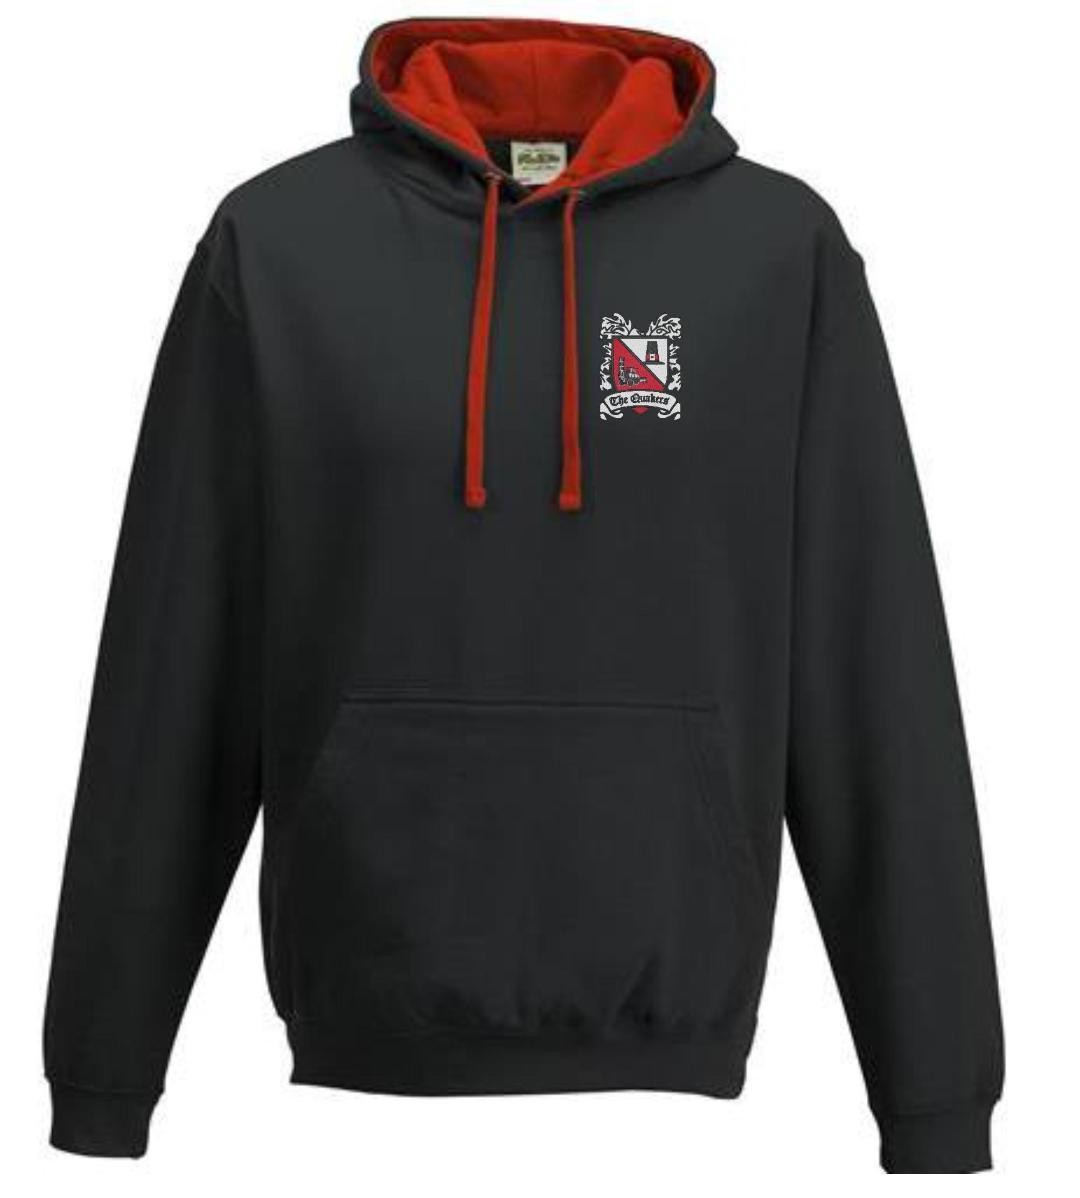 Hoody Junior Black/Red (Ordered on Request)